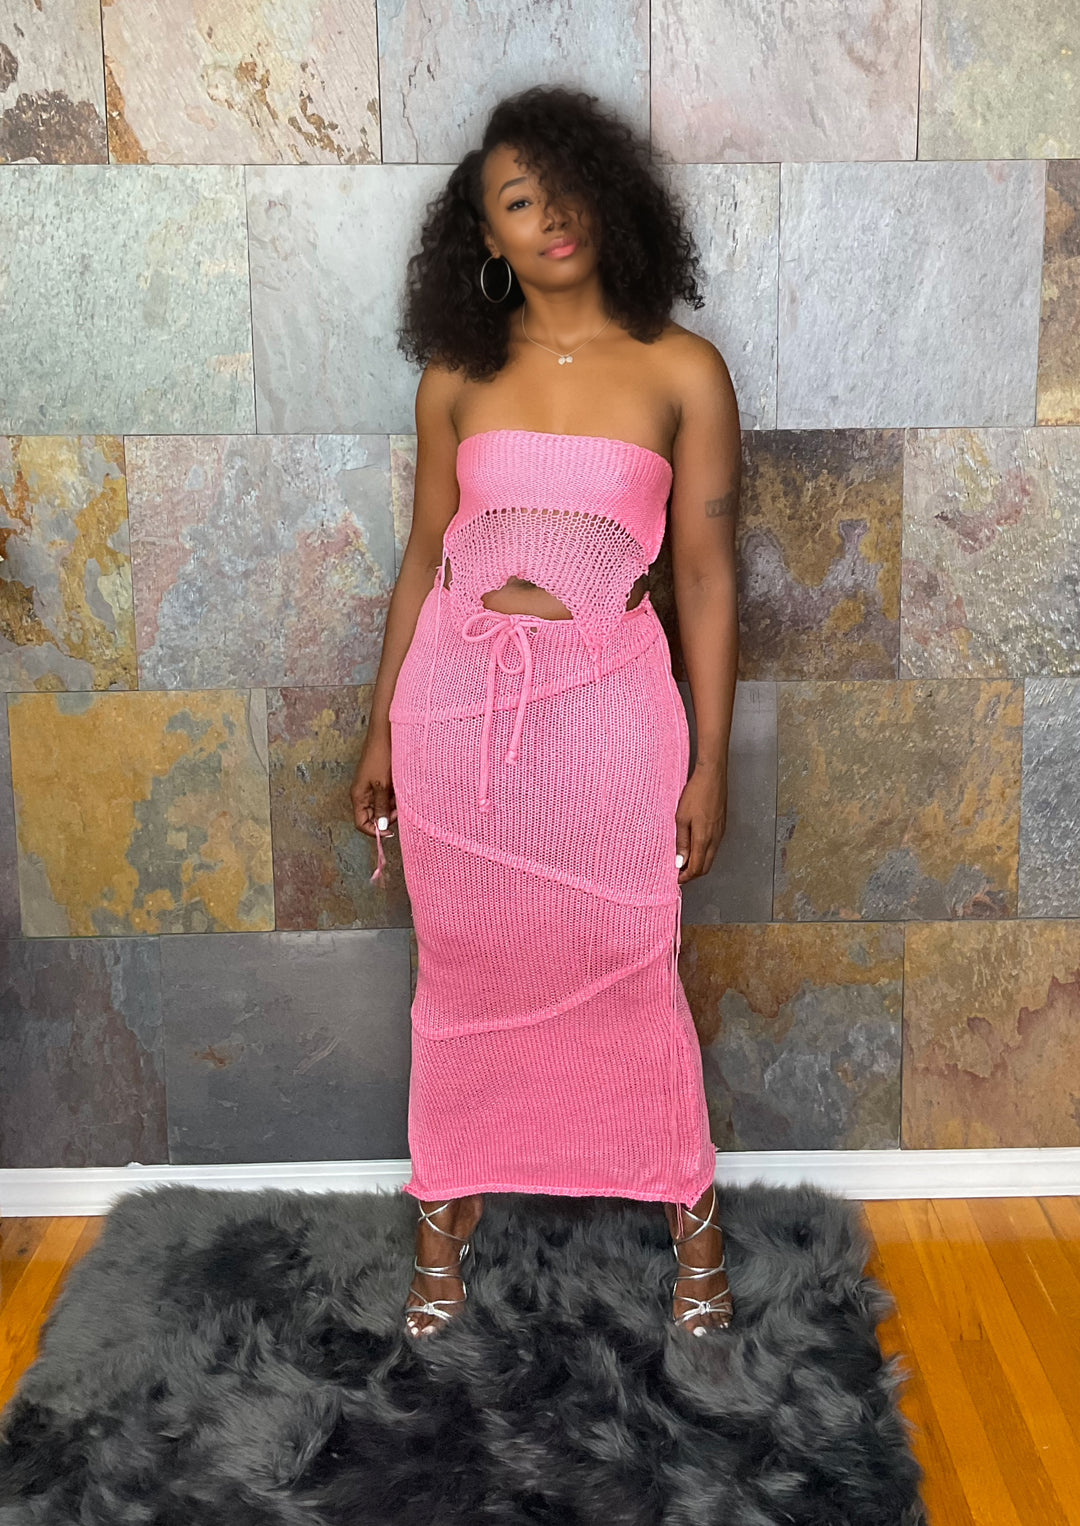 The "Storme" 2 Piece Skirt Set in Pink | Ready to Ship